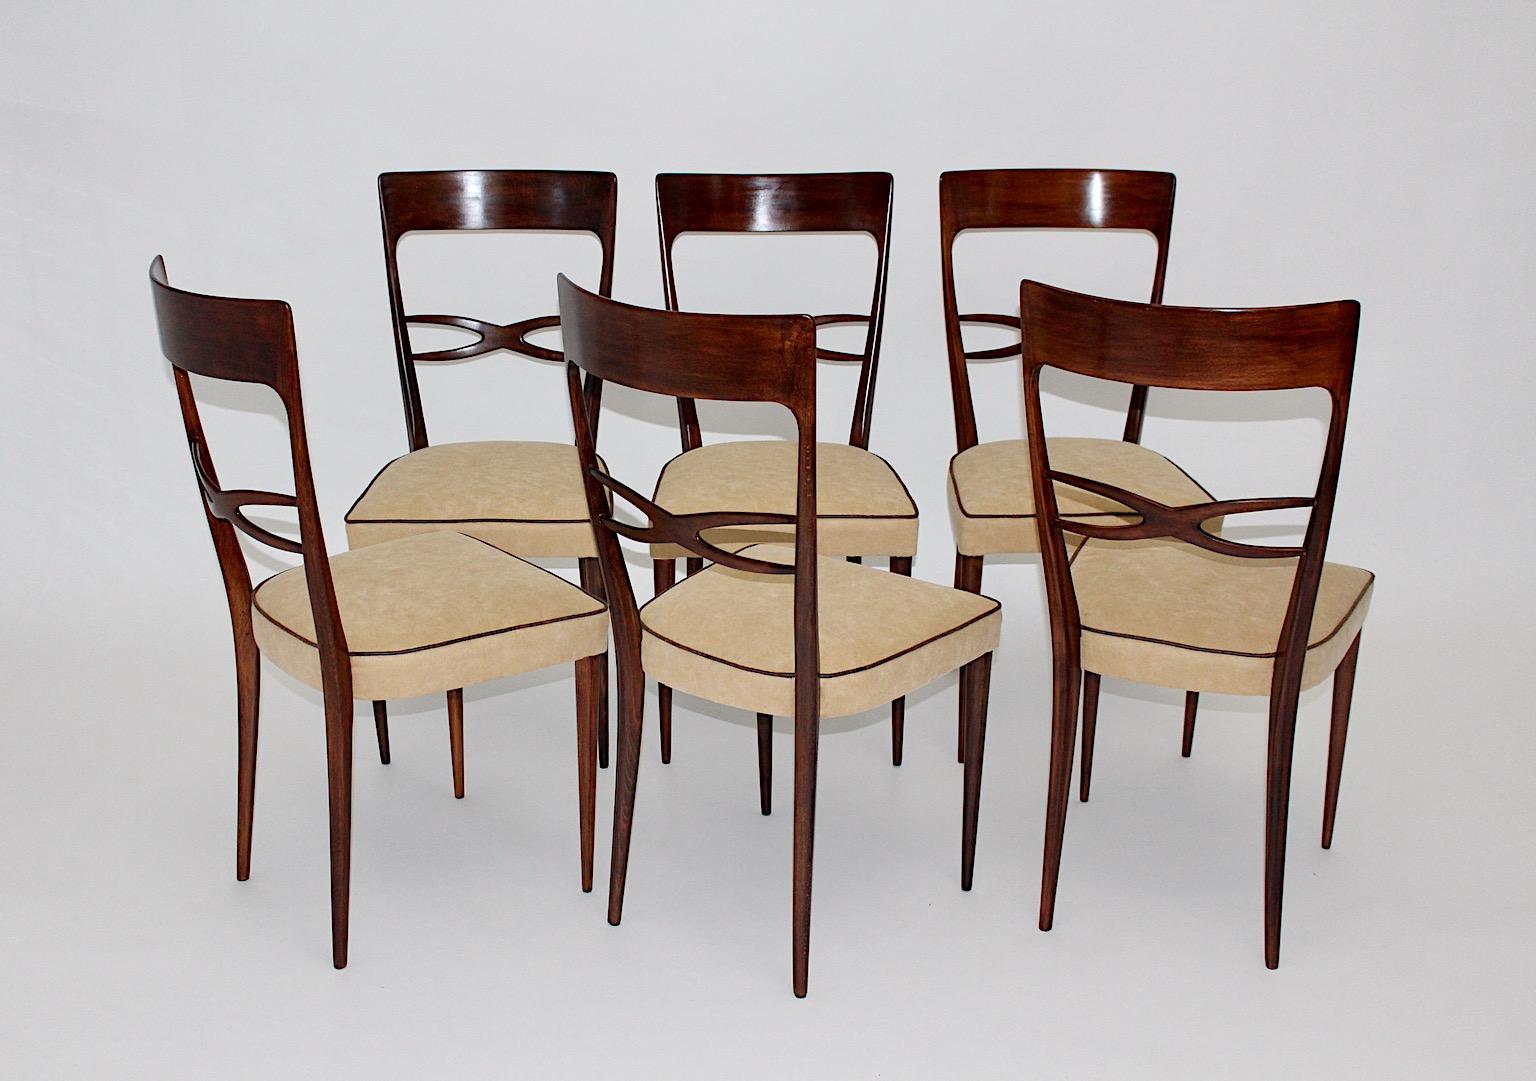 Mid-Century Modern set of six brown beech dining chairs by Melchiorre Bega attributed circa 1950 Italy.
The Italian Mid-Century Modern beech dining chairs is top-quality with walnut stained beech frame, while the upholstery shows butter cream